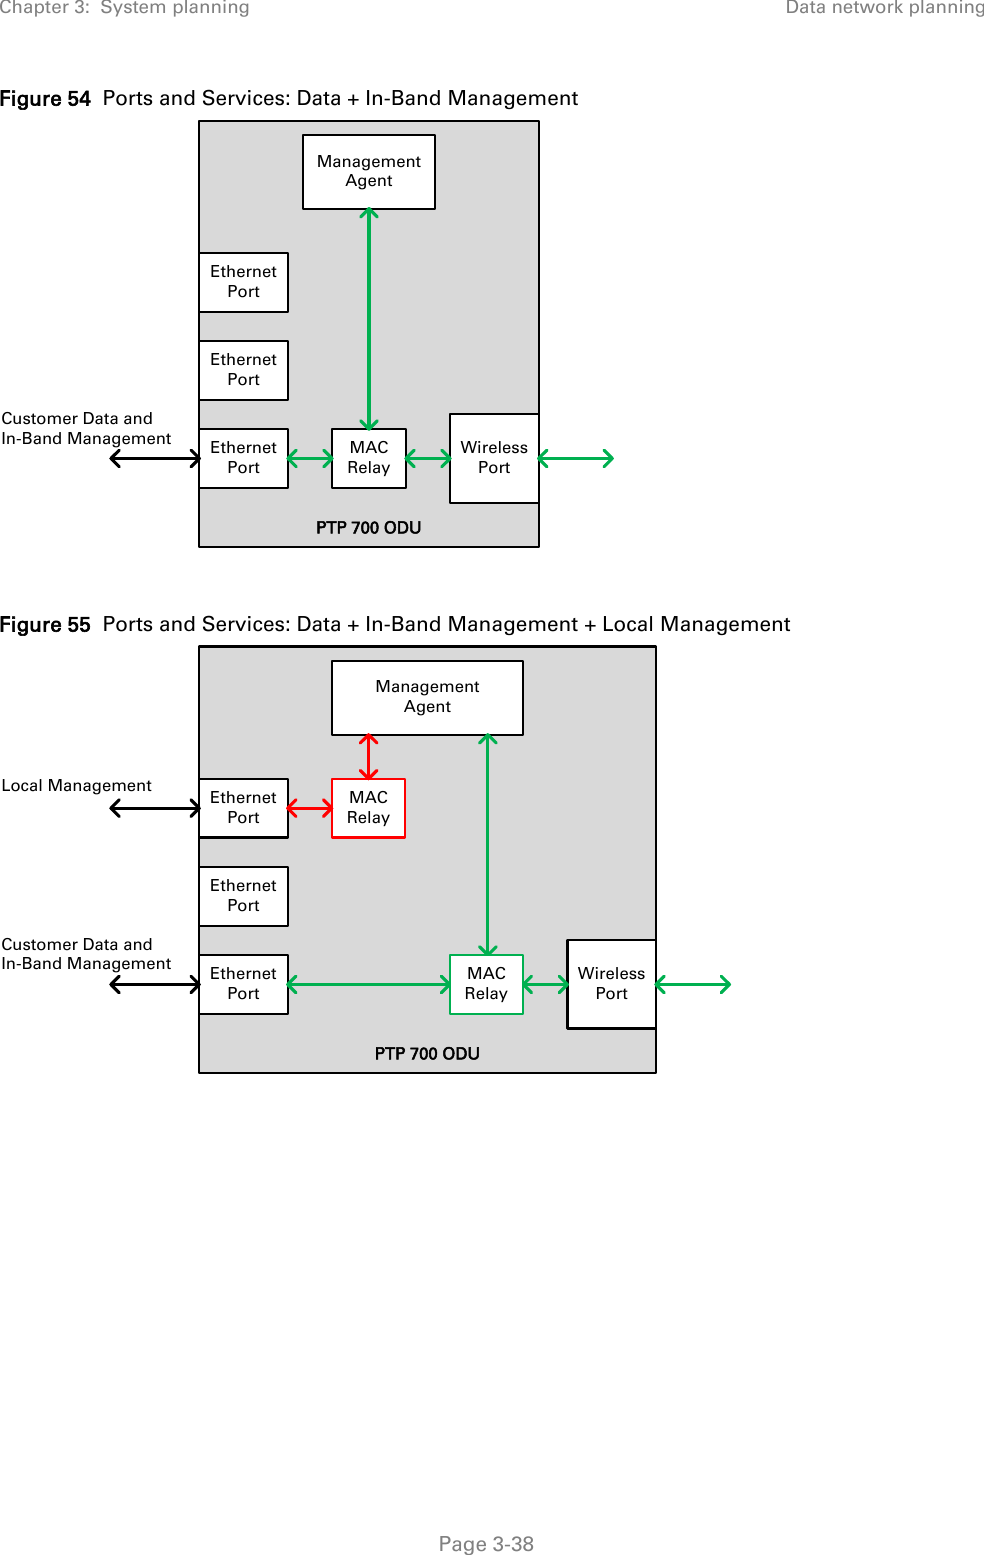 Chapter 3:  System planning Data network planning  Figure 54  Ports and Services: Data + In-Band Management   Figure 55  Ports and Services: Data + In-Band Management + Local Management   PTP 700 ODUManagementAgentWirelessPortEthernetPortEthernetPortEthernetPortMAC RelayCustomer Data andIn-Band ManagementPTP 700 ODUManagementAgentWirelessPortEthernetPortEthernetPortEthernetPortMAC RelayCustomer Data andIn-Band ManagementLocal ManagementMAC Relay Page 3-38 